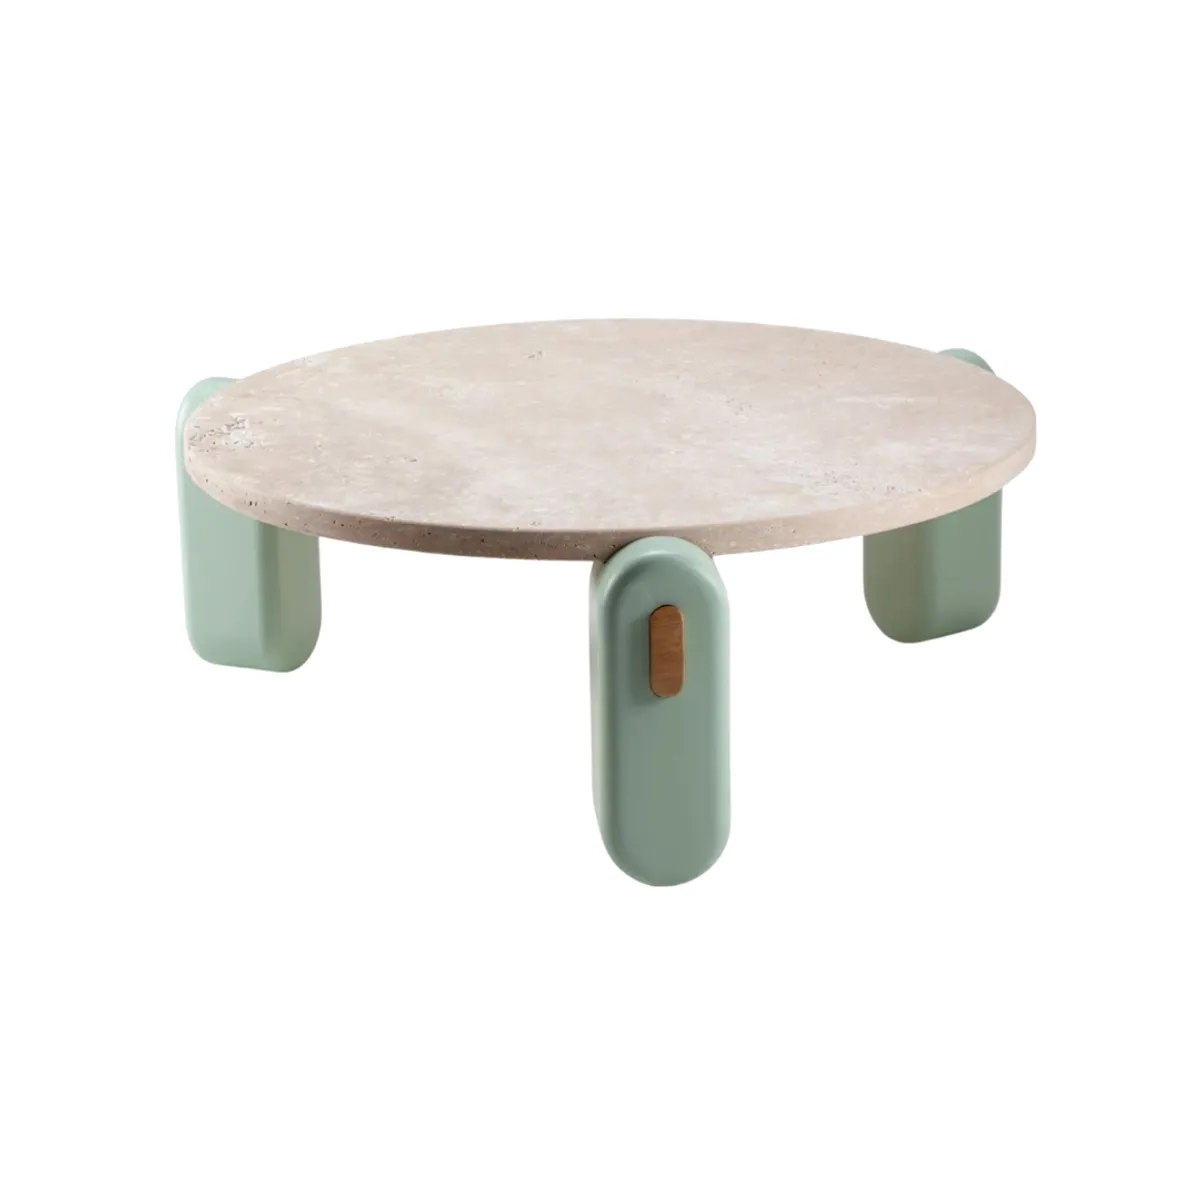 Mabel table 1